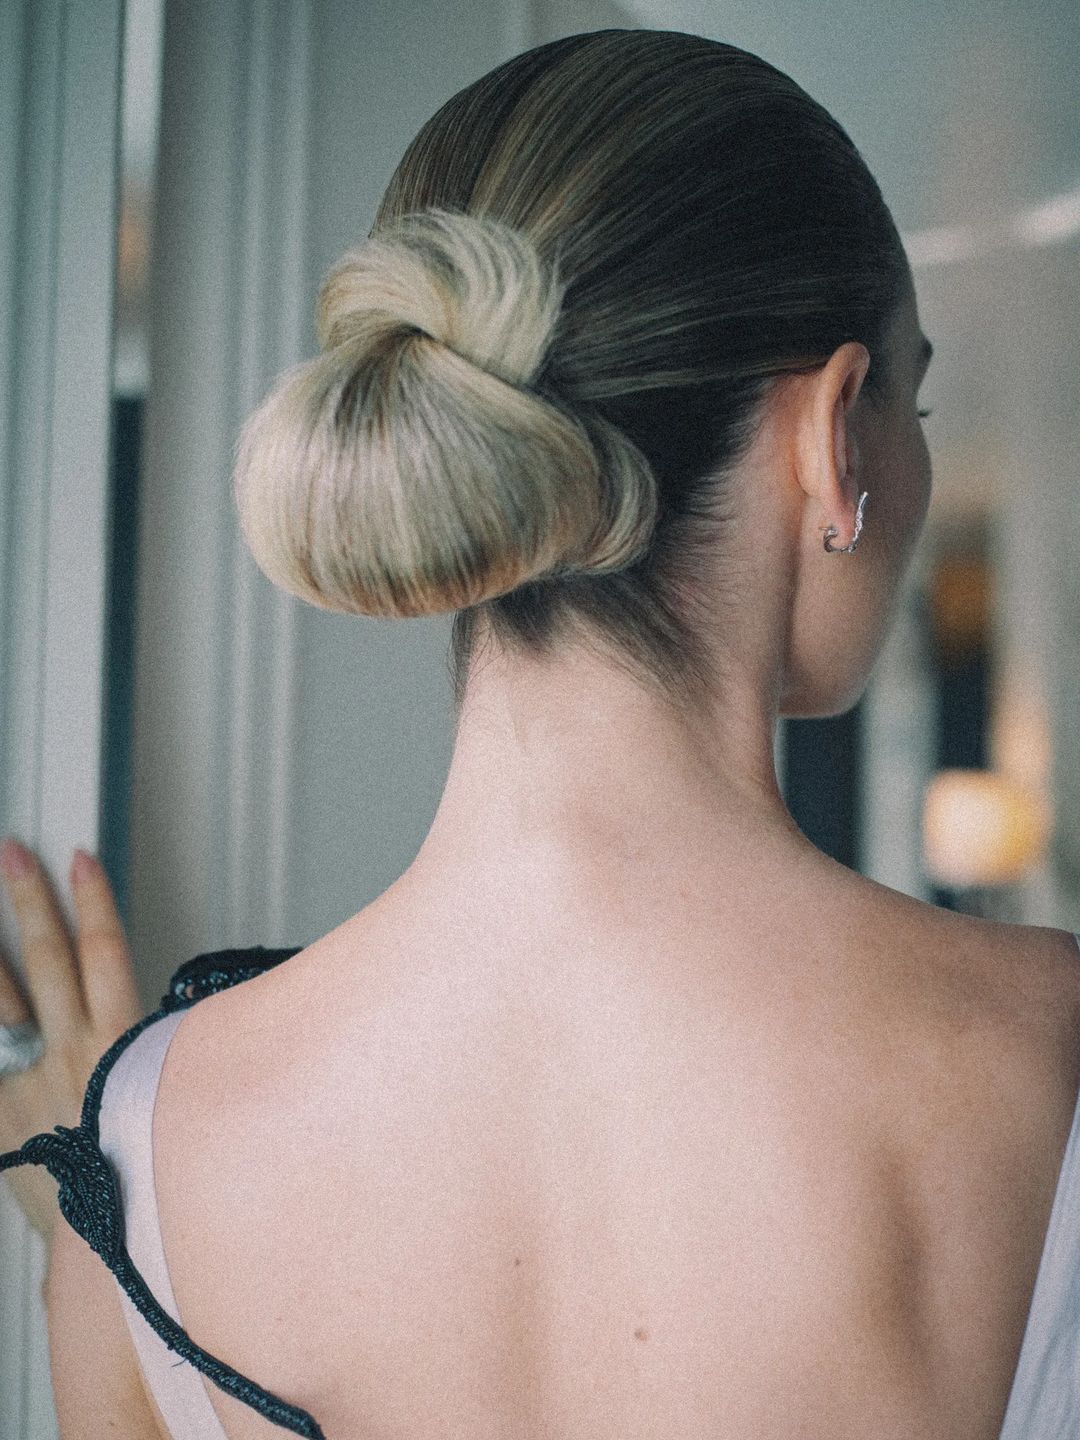 Lily James' hair in a chignon